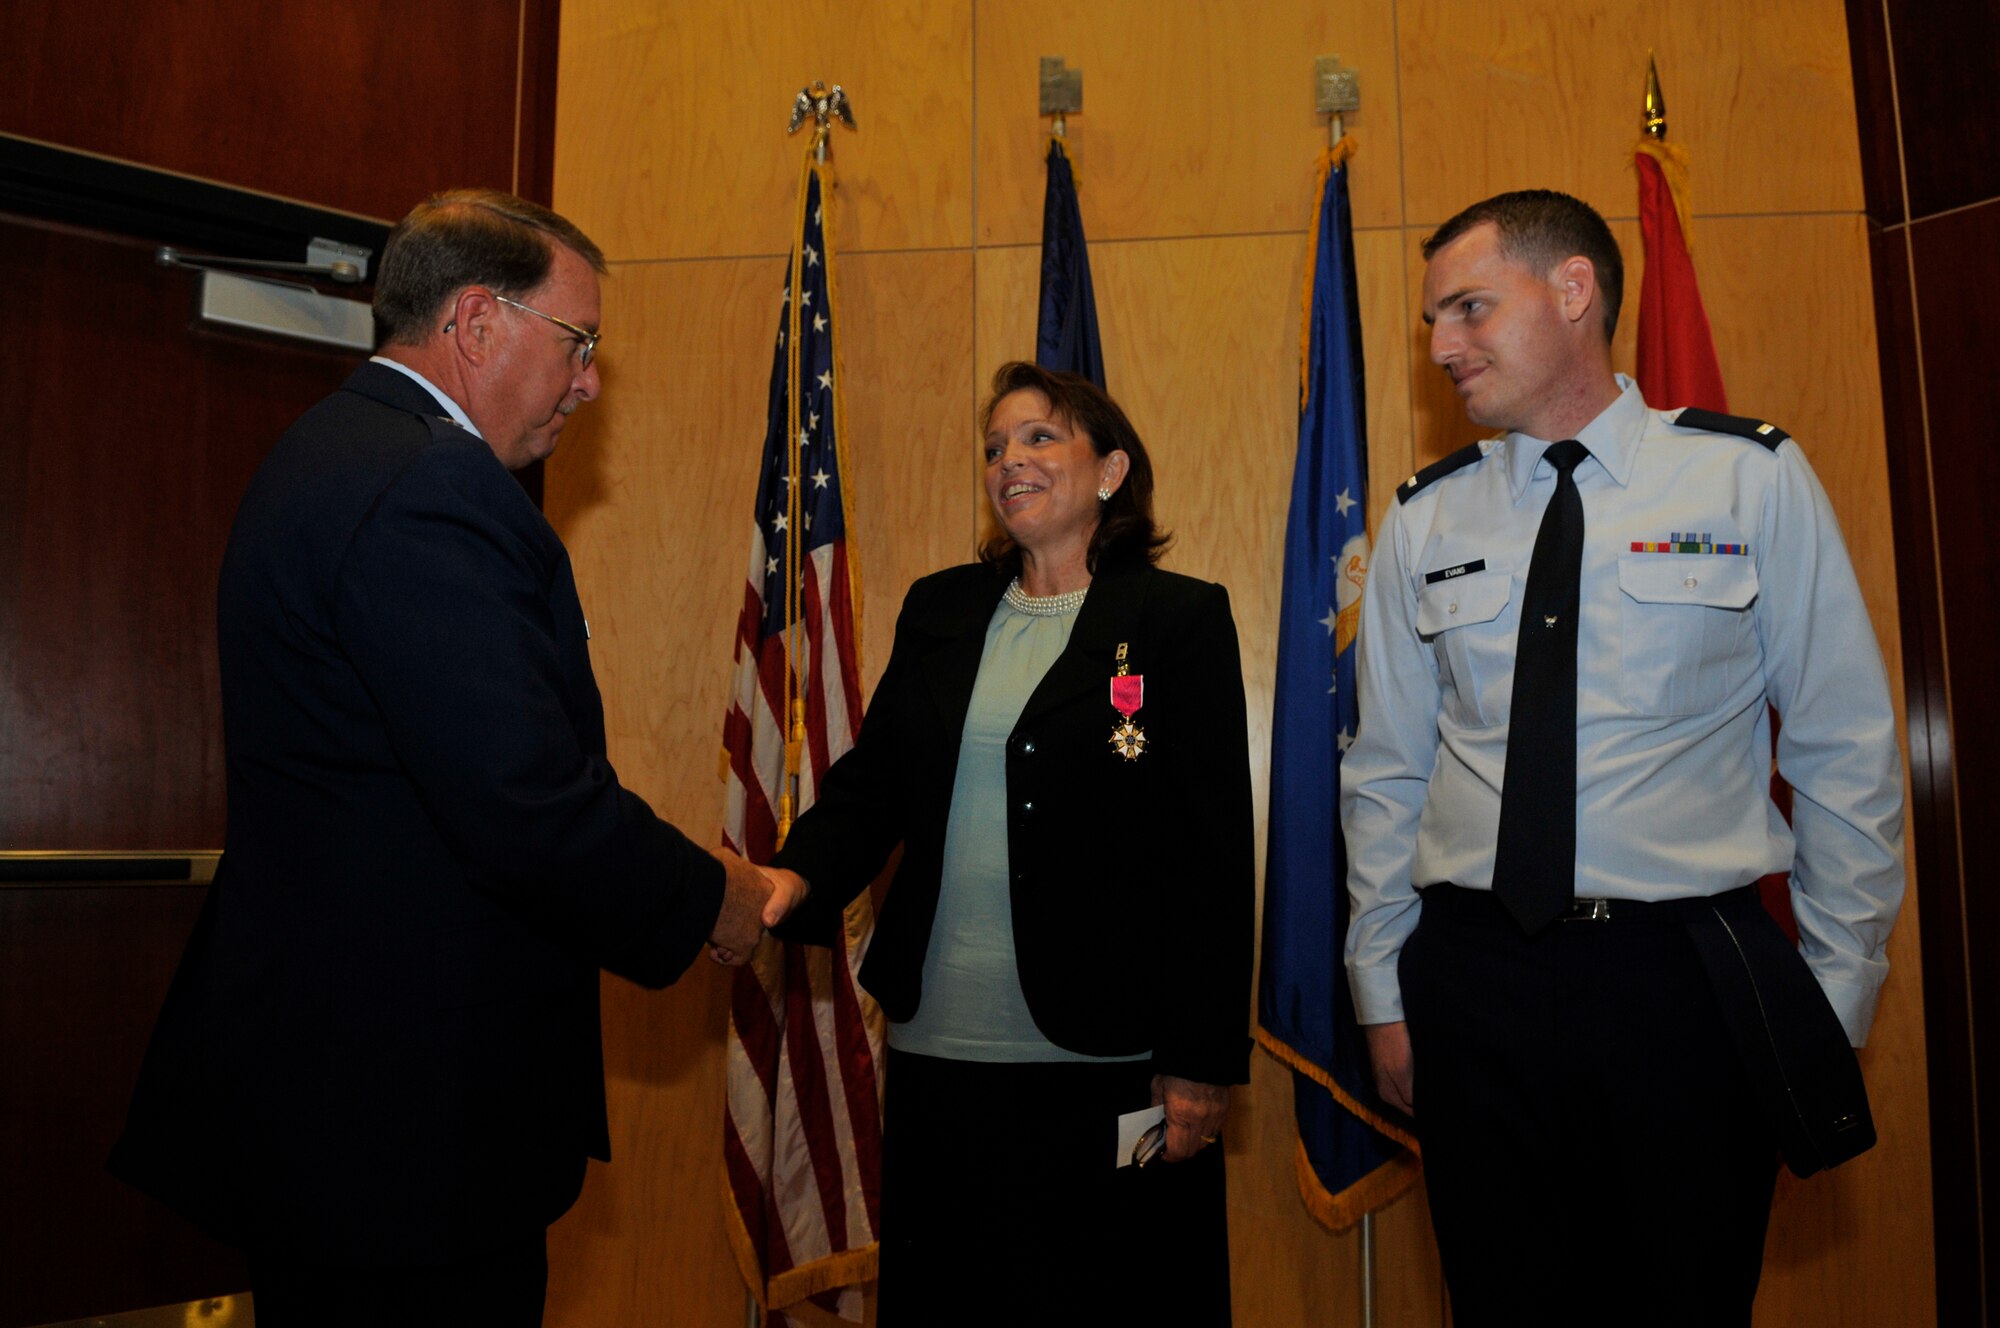 Brig. Gen. Wayne E. Lee presents the Legion of Merit award in honor of the late Col. Bruce C. Evans to his wife, Mrs. Connie Evans, and his son, 1st Lt. Benjamin Evans.  Colonel Evans was awarded the Legion of Merit posthumously for exceptionally meritorious conduct as the state staff Judge Advocate with the Utah Air National Guard Headquarters. (Air Force photo by TSgt Jeremy Giacoletto-Stegall)